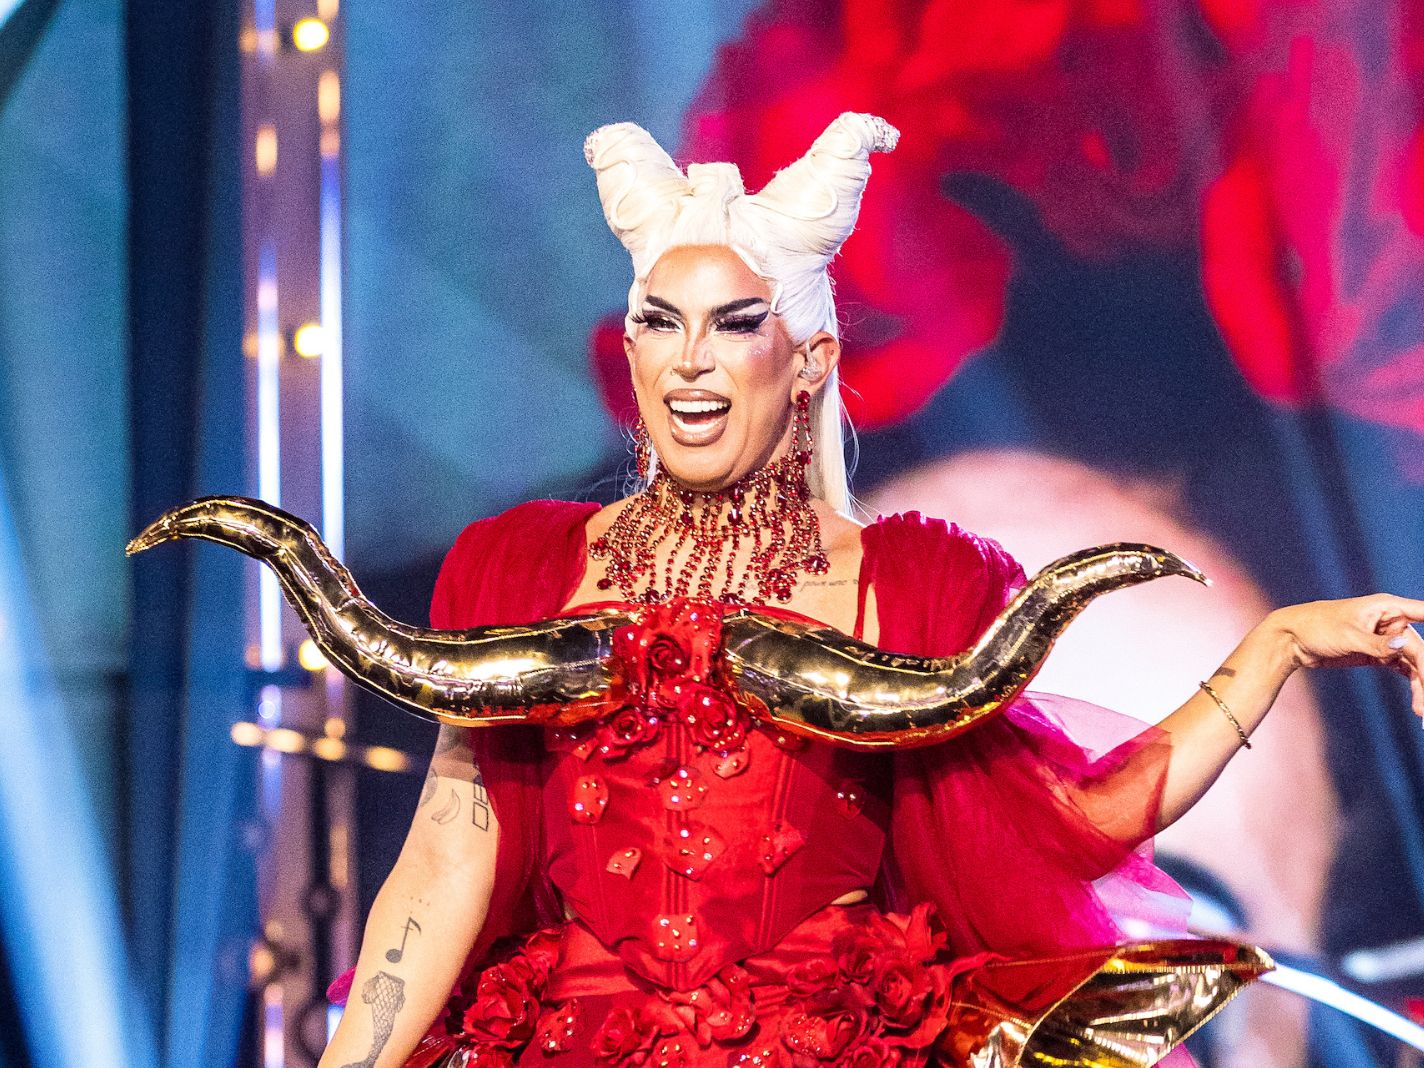 This Mexican Drag Queen is the New ‘Queen of The Universe’ Winner